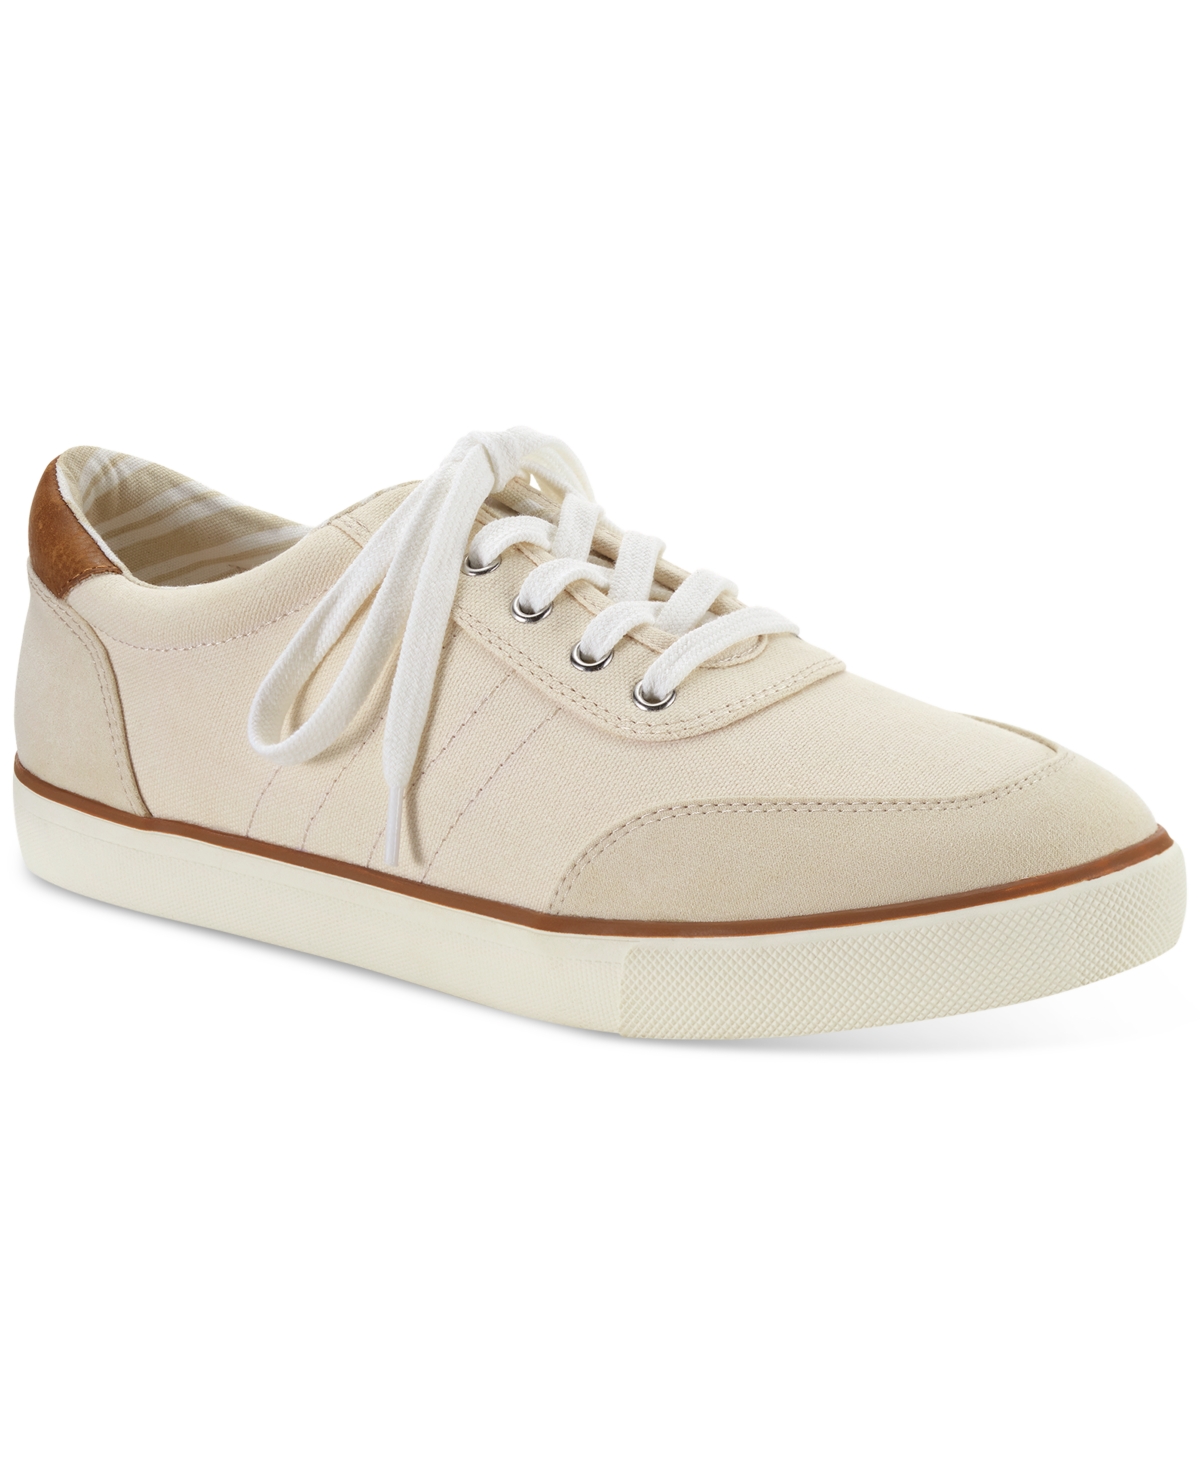 Club Room Men's Cameron Sneaker, Created For Macy's Men's Shoes In ...